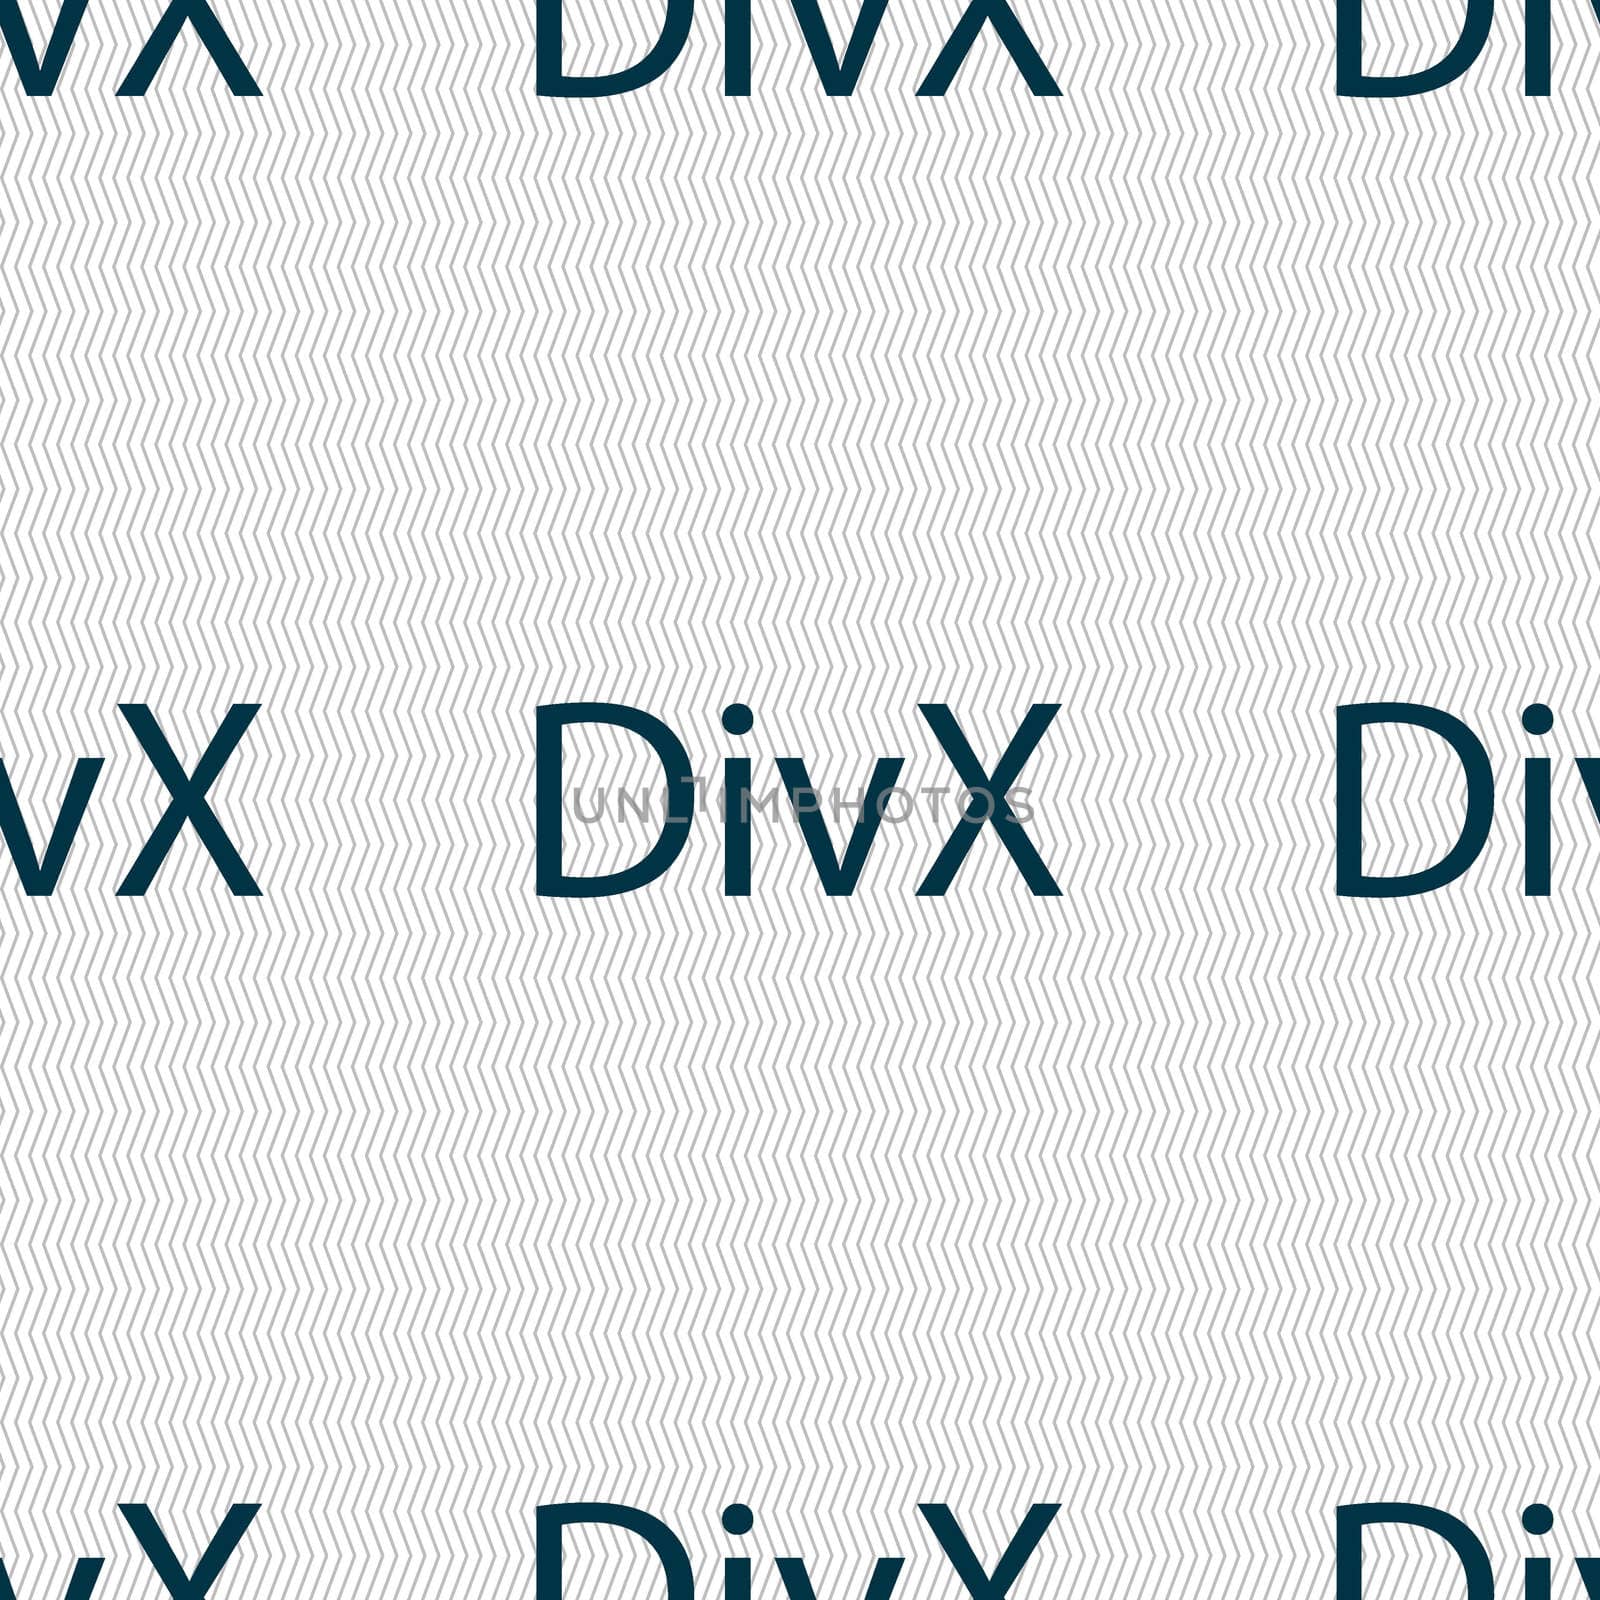 DivX video format sign icon. symbol. Seamless abstract background with geometric shapes. illustration